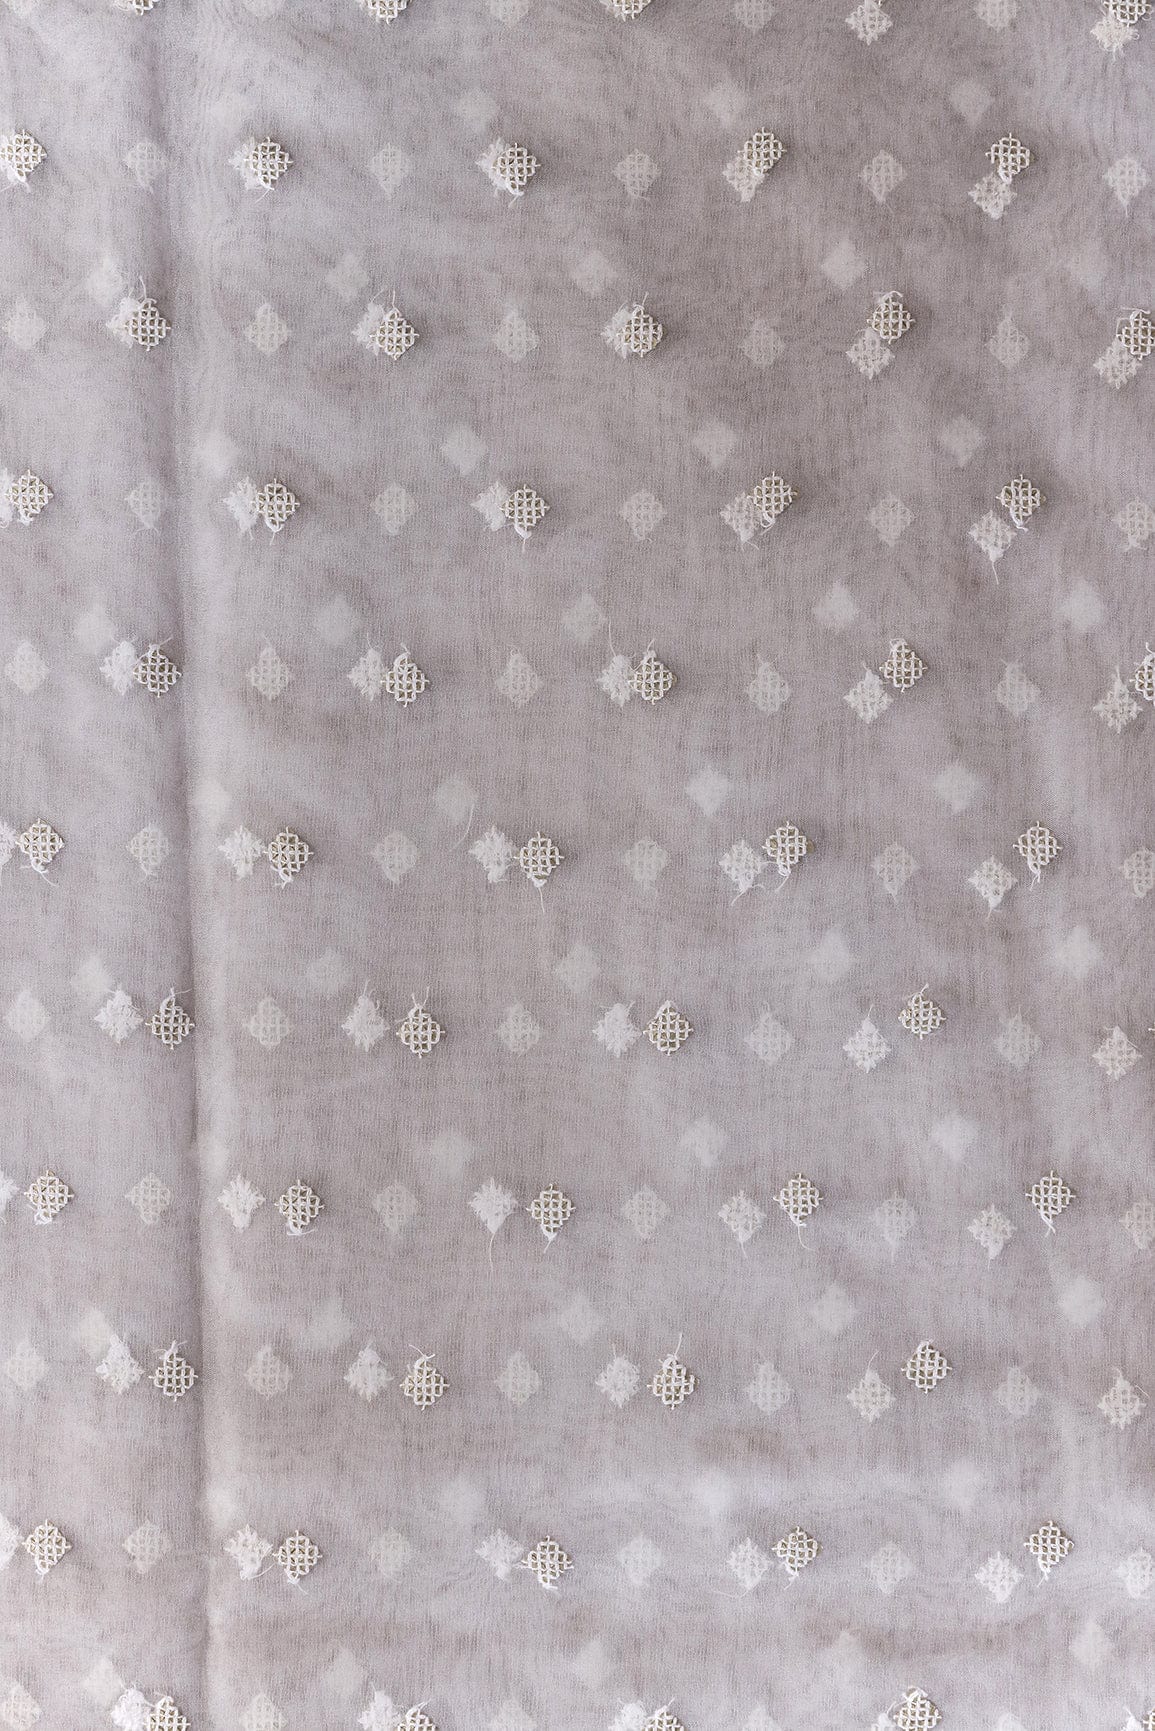 doeraa Embroidery Fabrics 4.75 Metre Cut Piece Of Gold Sequins with White Thread Embroidery On White Organza Fabric